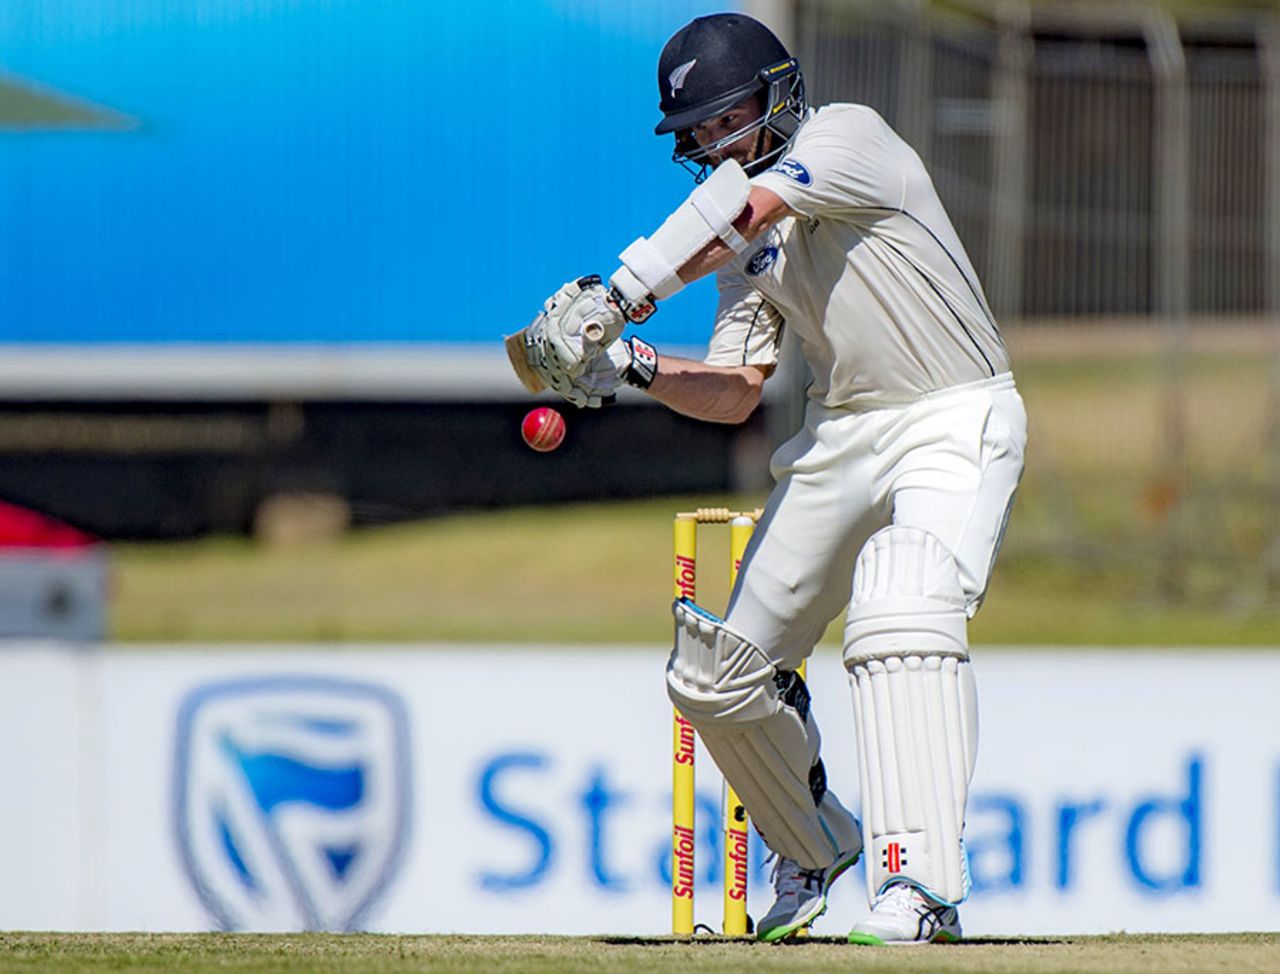 Kane Williamson shapes to cut, South Africa v New Zealand, 2nd Test, Centurion, 3rd day, August 29, 2016